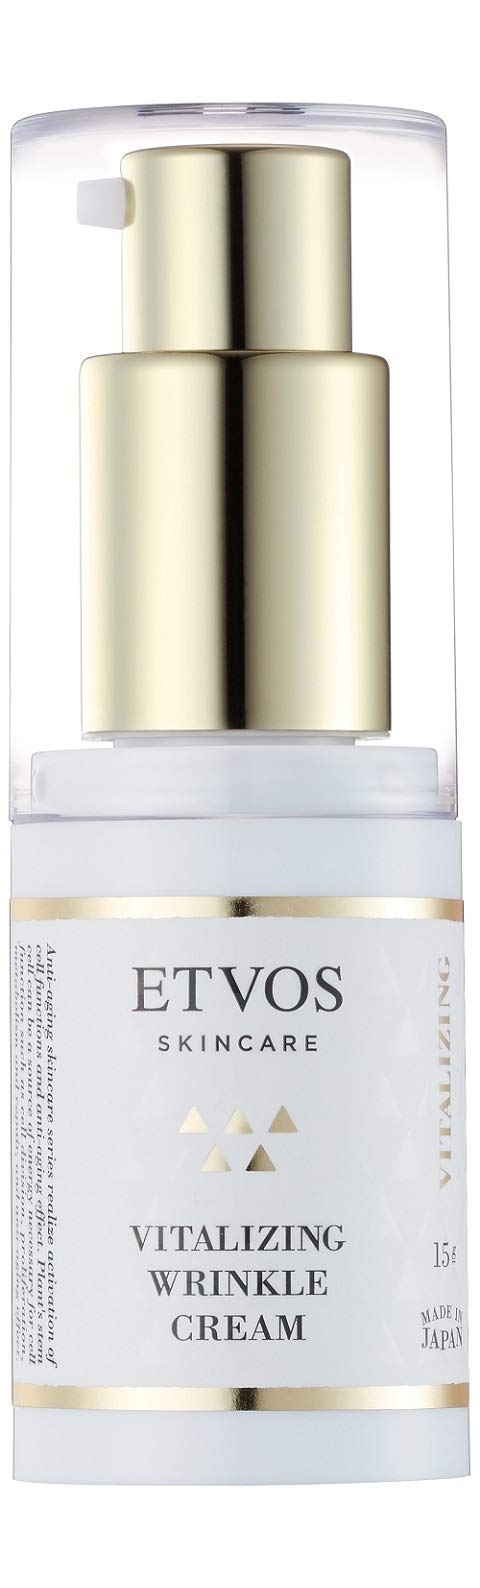 ETVOS Vitalizing Wrinkle Cream 15g [Eye cream that makes dry fine wrinkles inconspicuous] (Efficacy evaluation tested) Stem cell extract Aging care